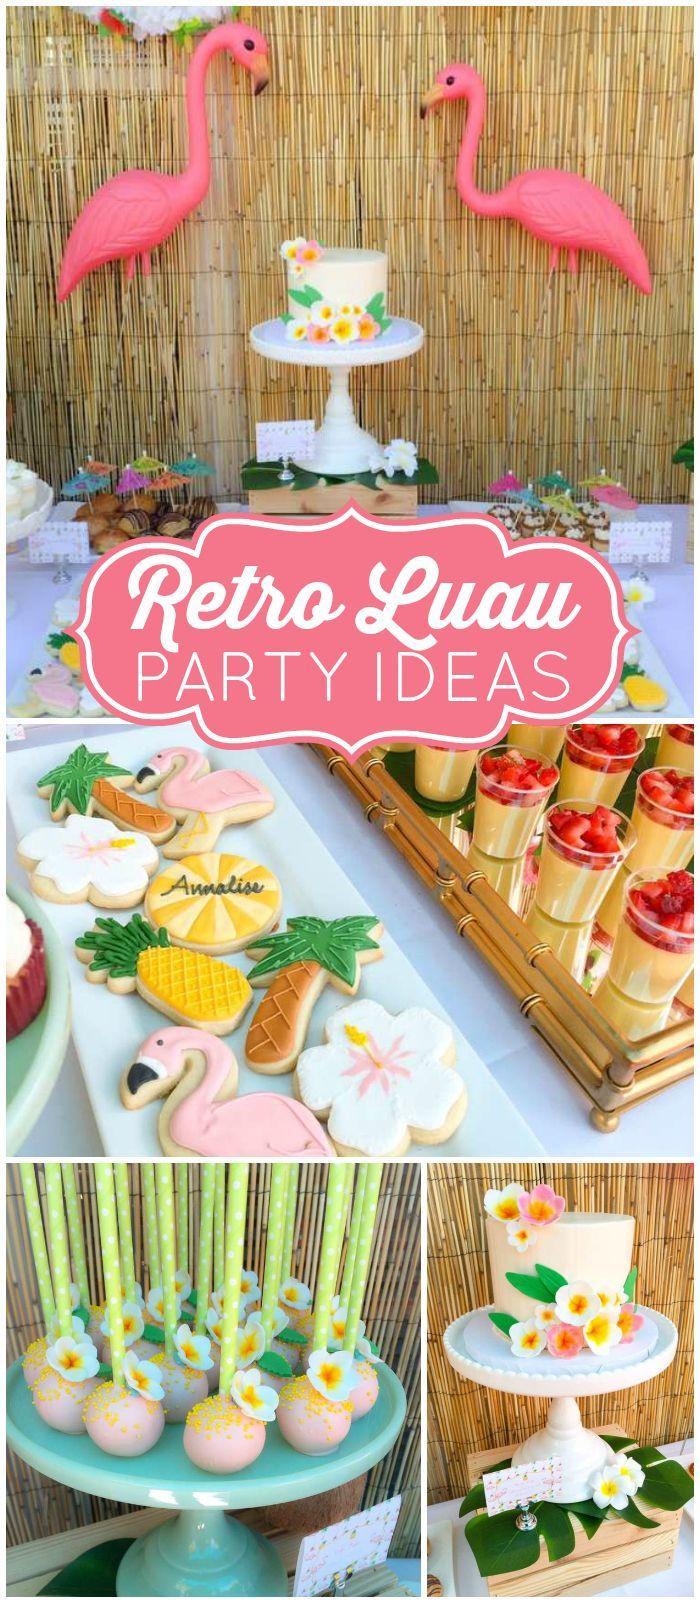 Summer Luau Party Ideas
 How cool is this retro luau for a graduation party See